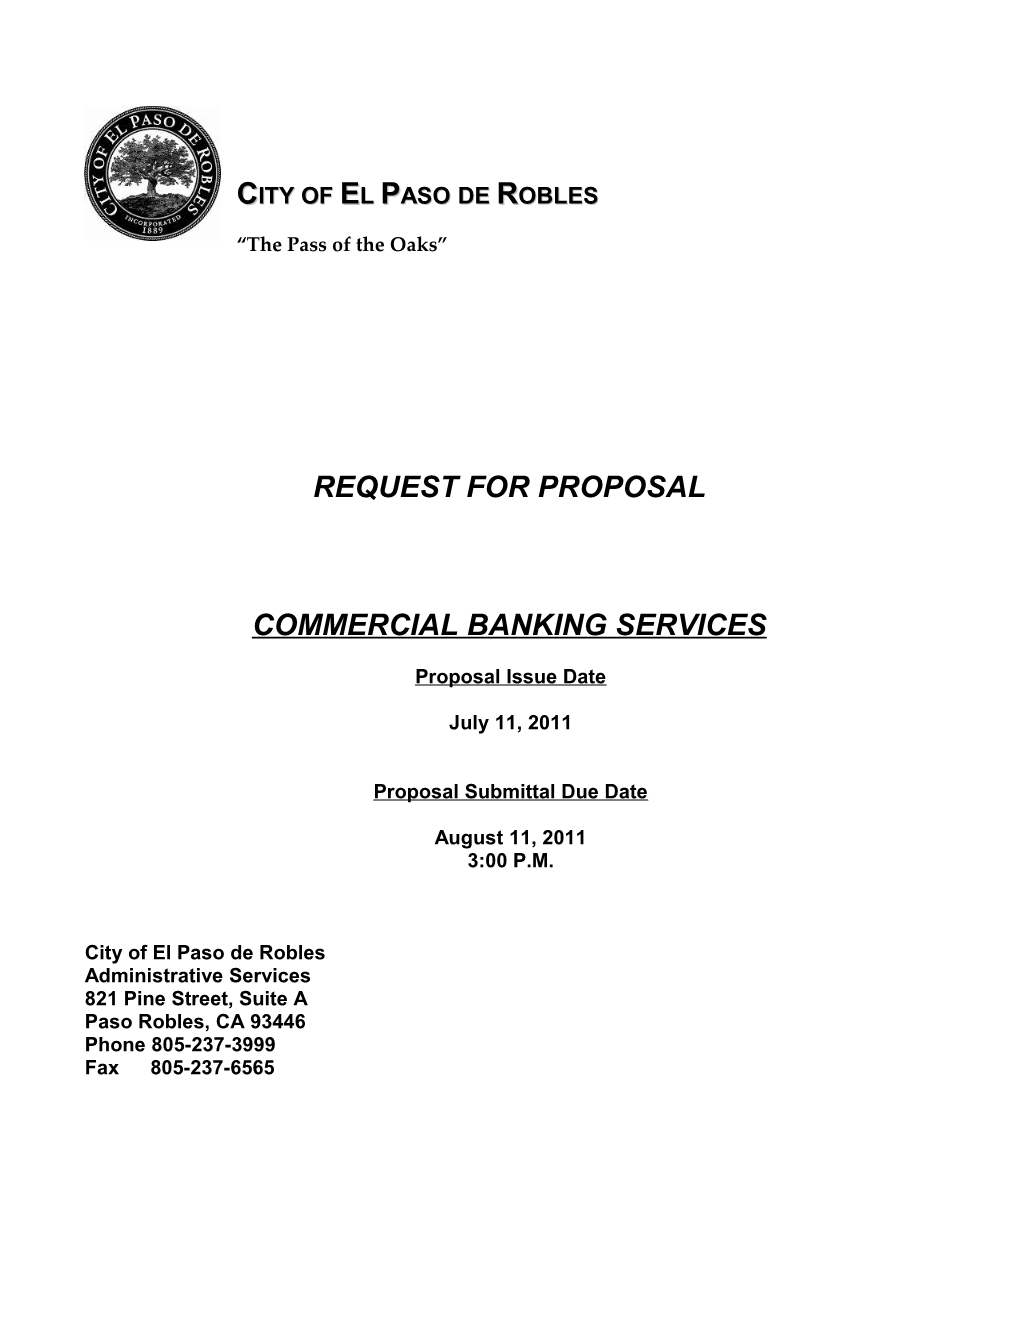 RFP Commercial Banking Services